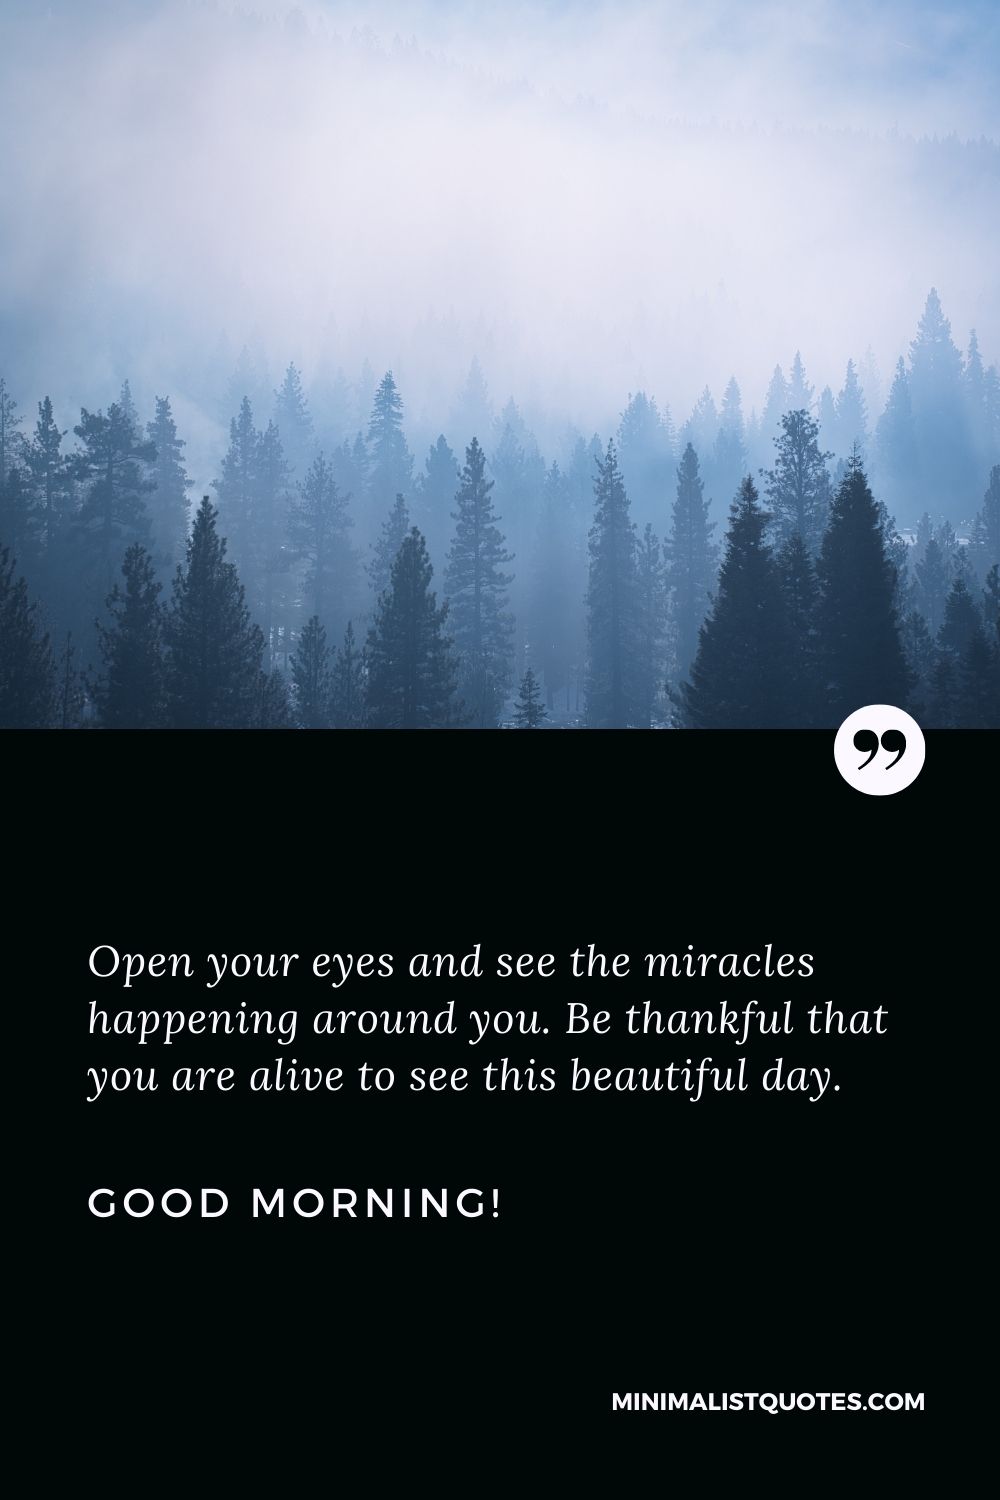 Sweet good morning message: Open your eyes and see the miracles happening around you. Be thankful that you are alive to see this beautiful day. Good Morning!